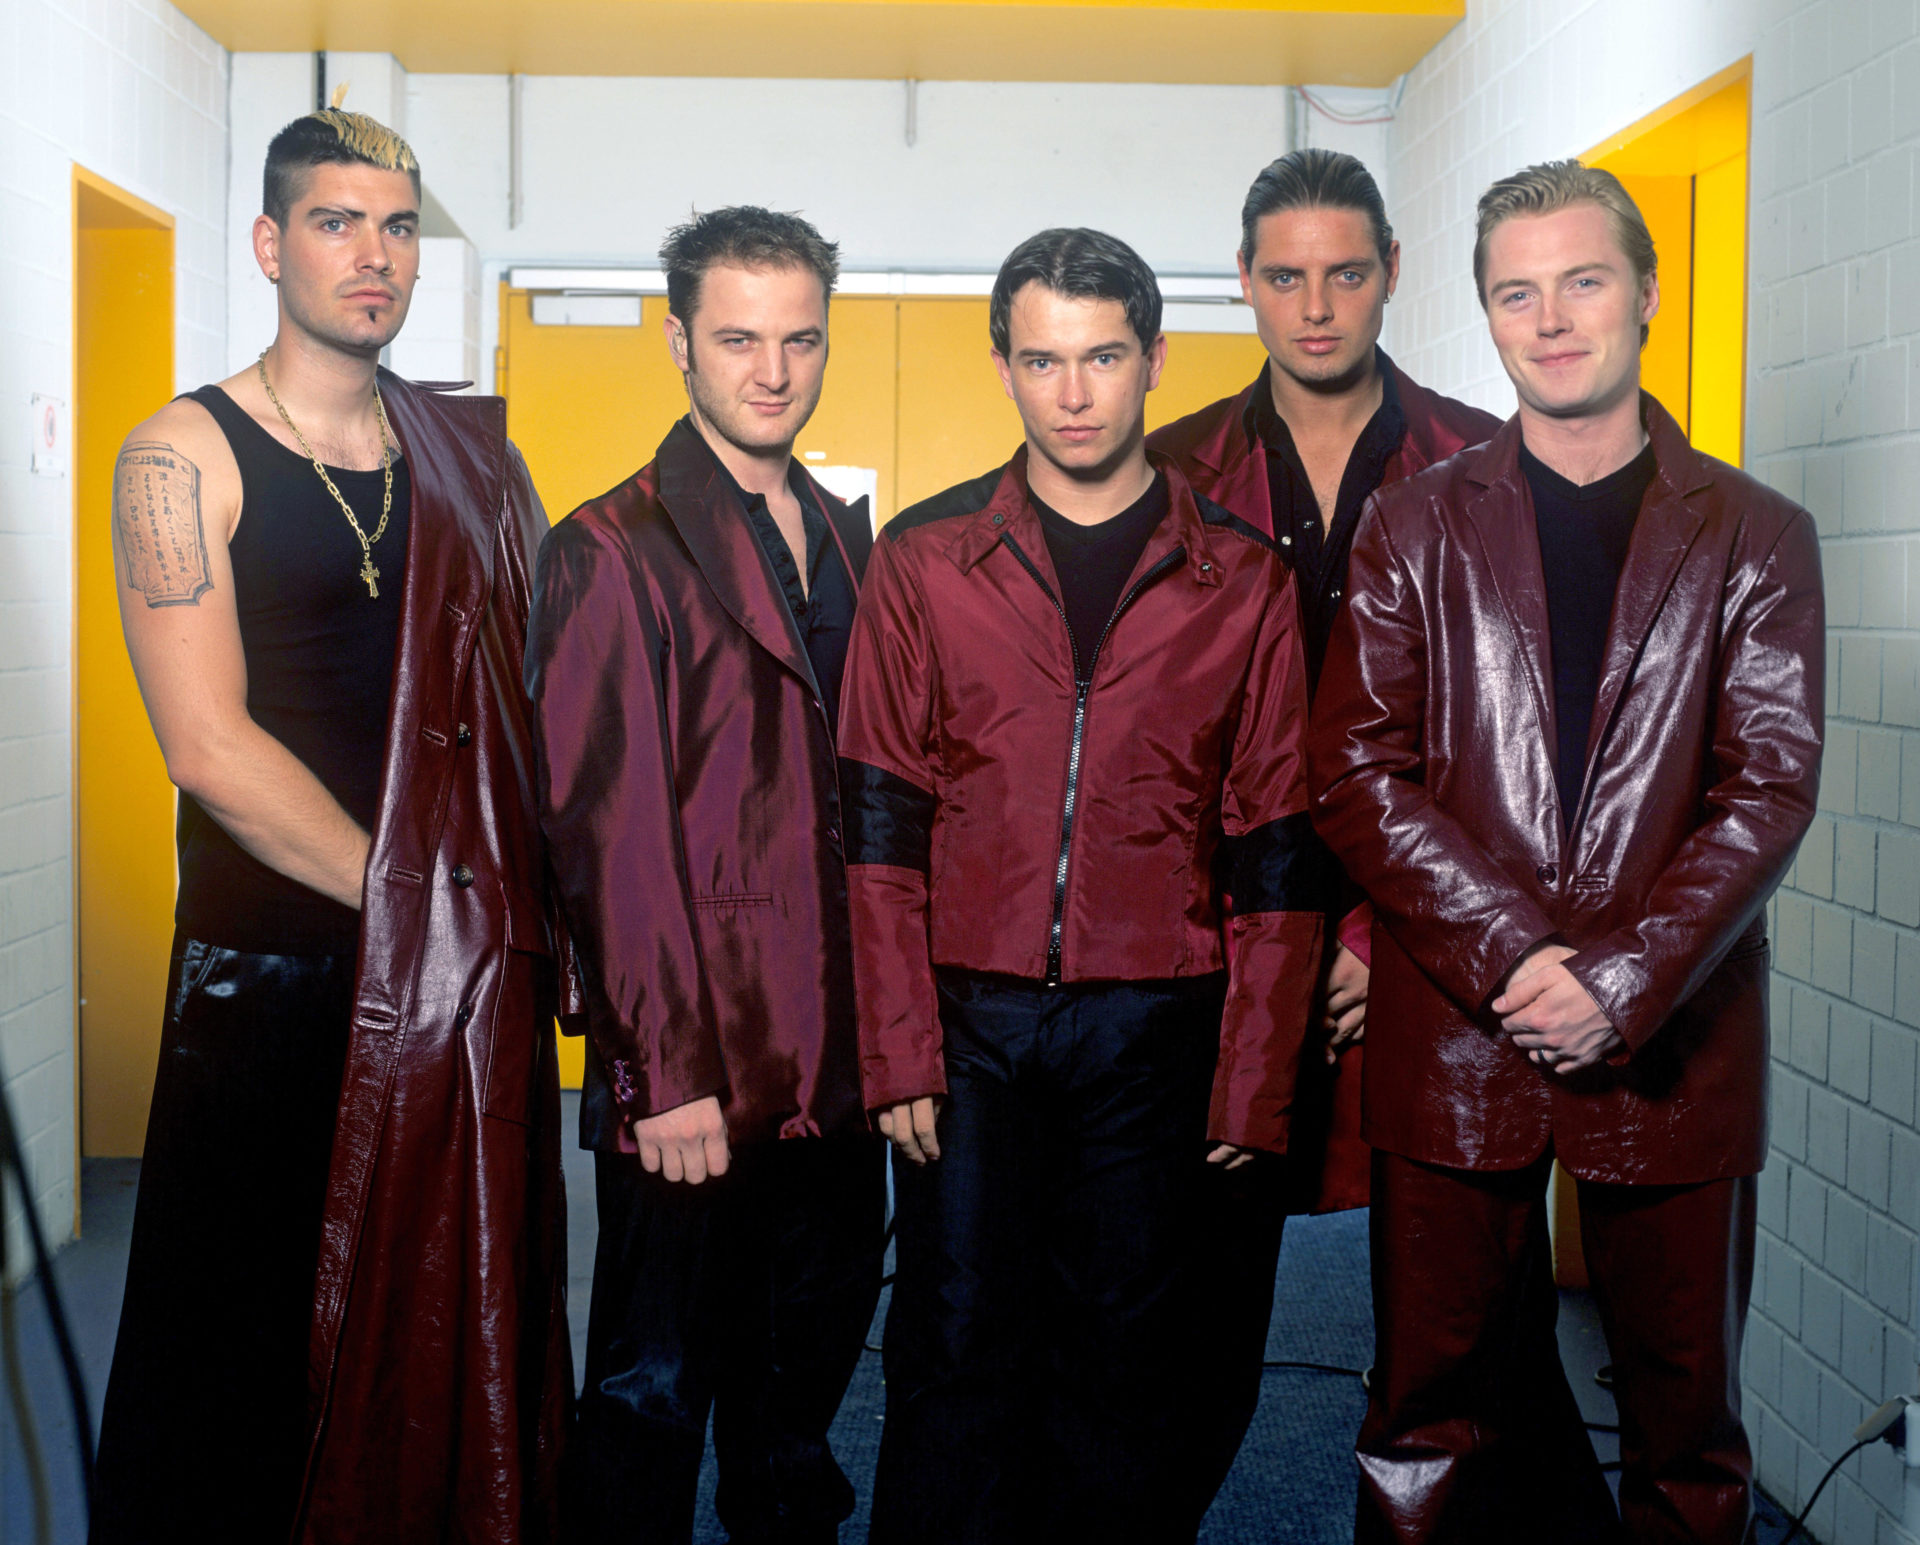 Boyzone are pictured in Oberhausen, Germany in 1999